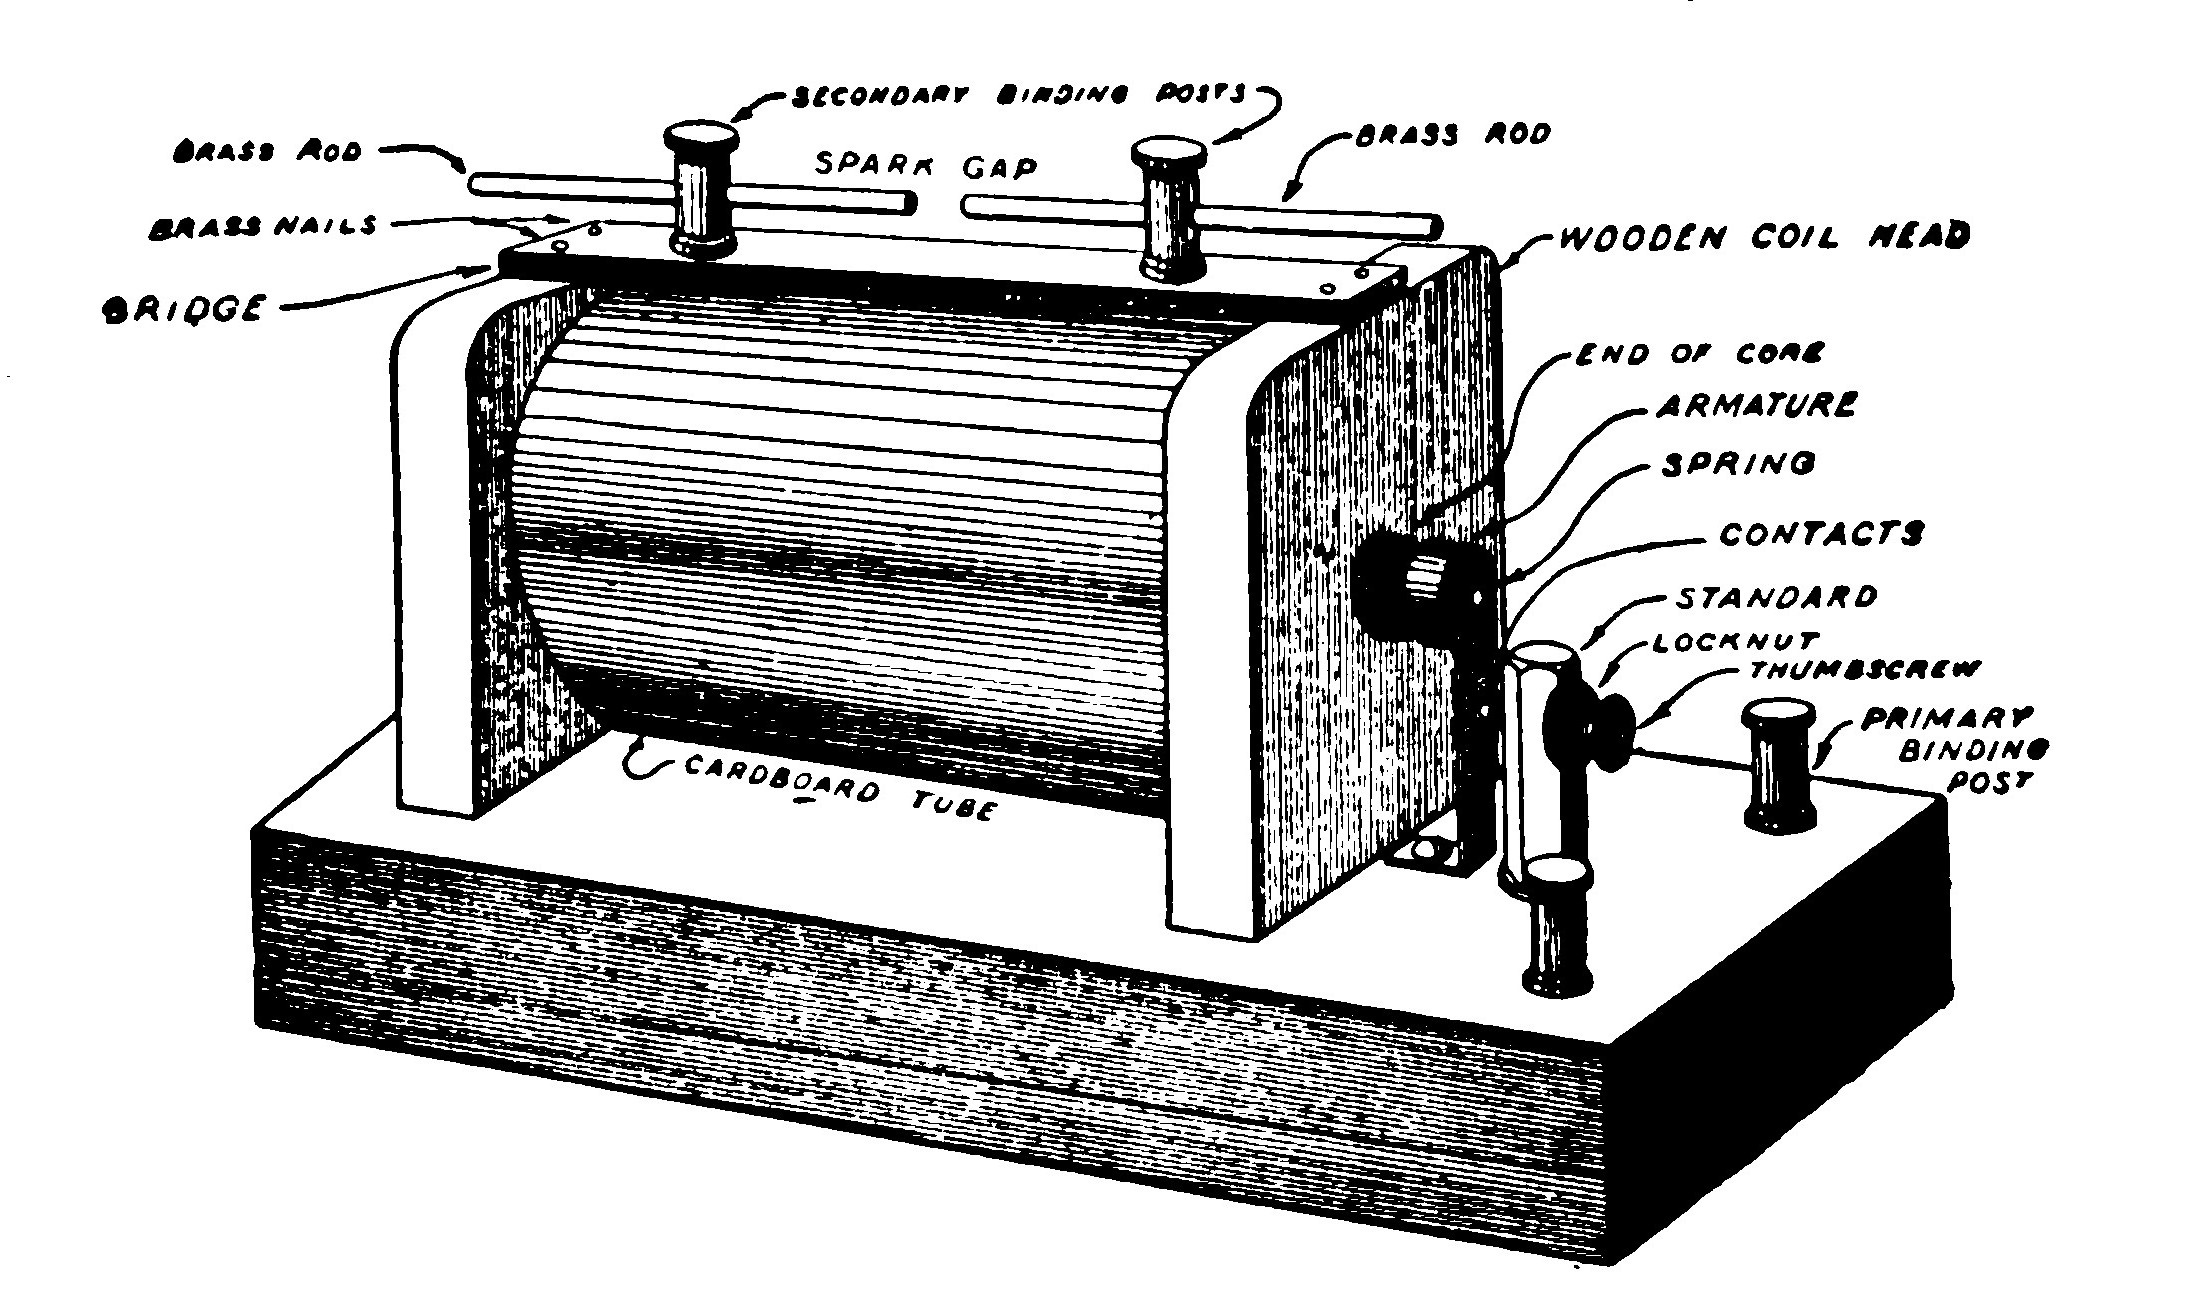 FIG. 122.—Perspective view of Coil showing names of the various parts.